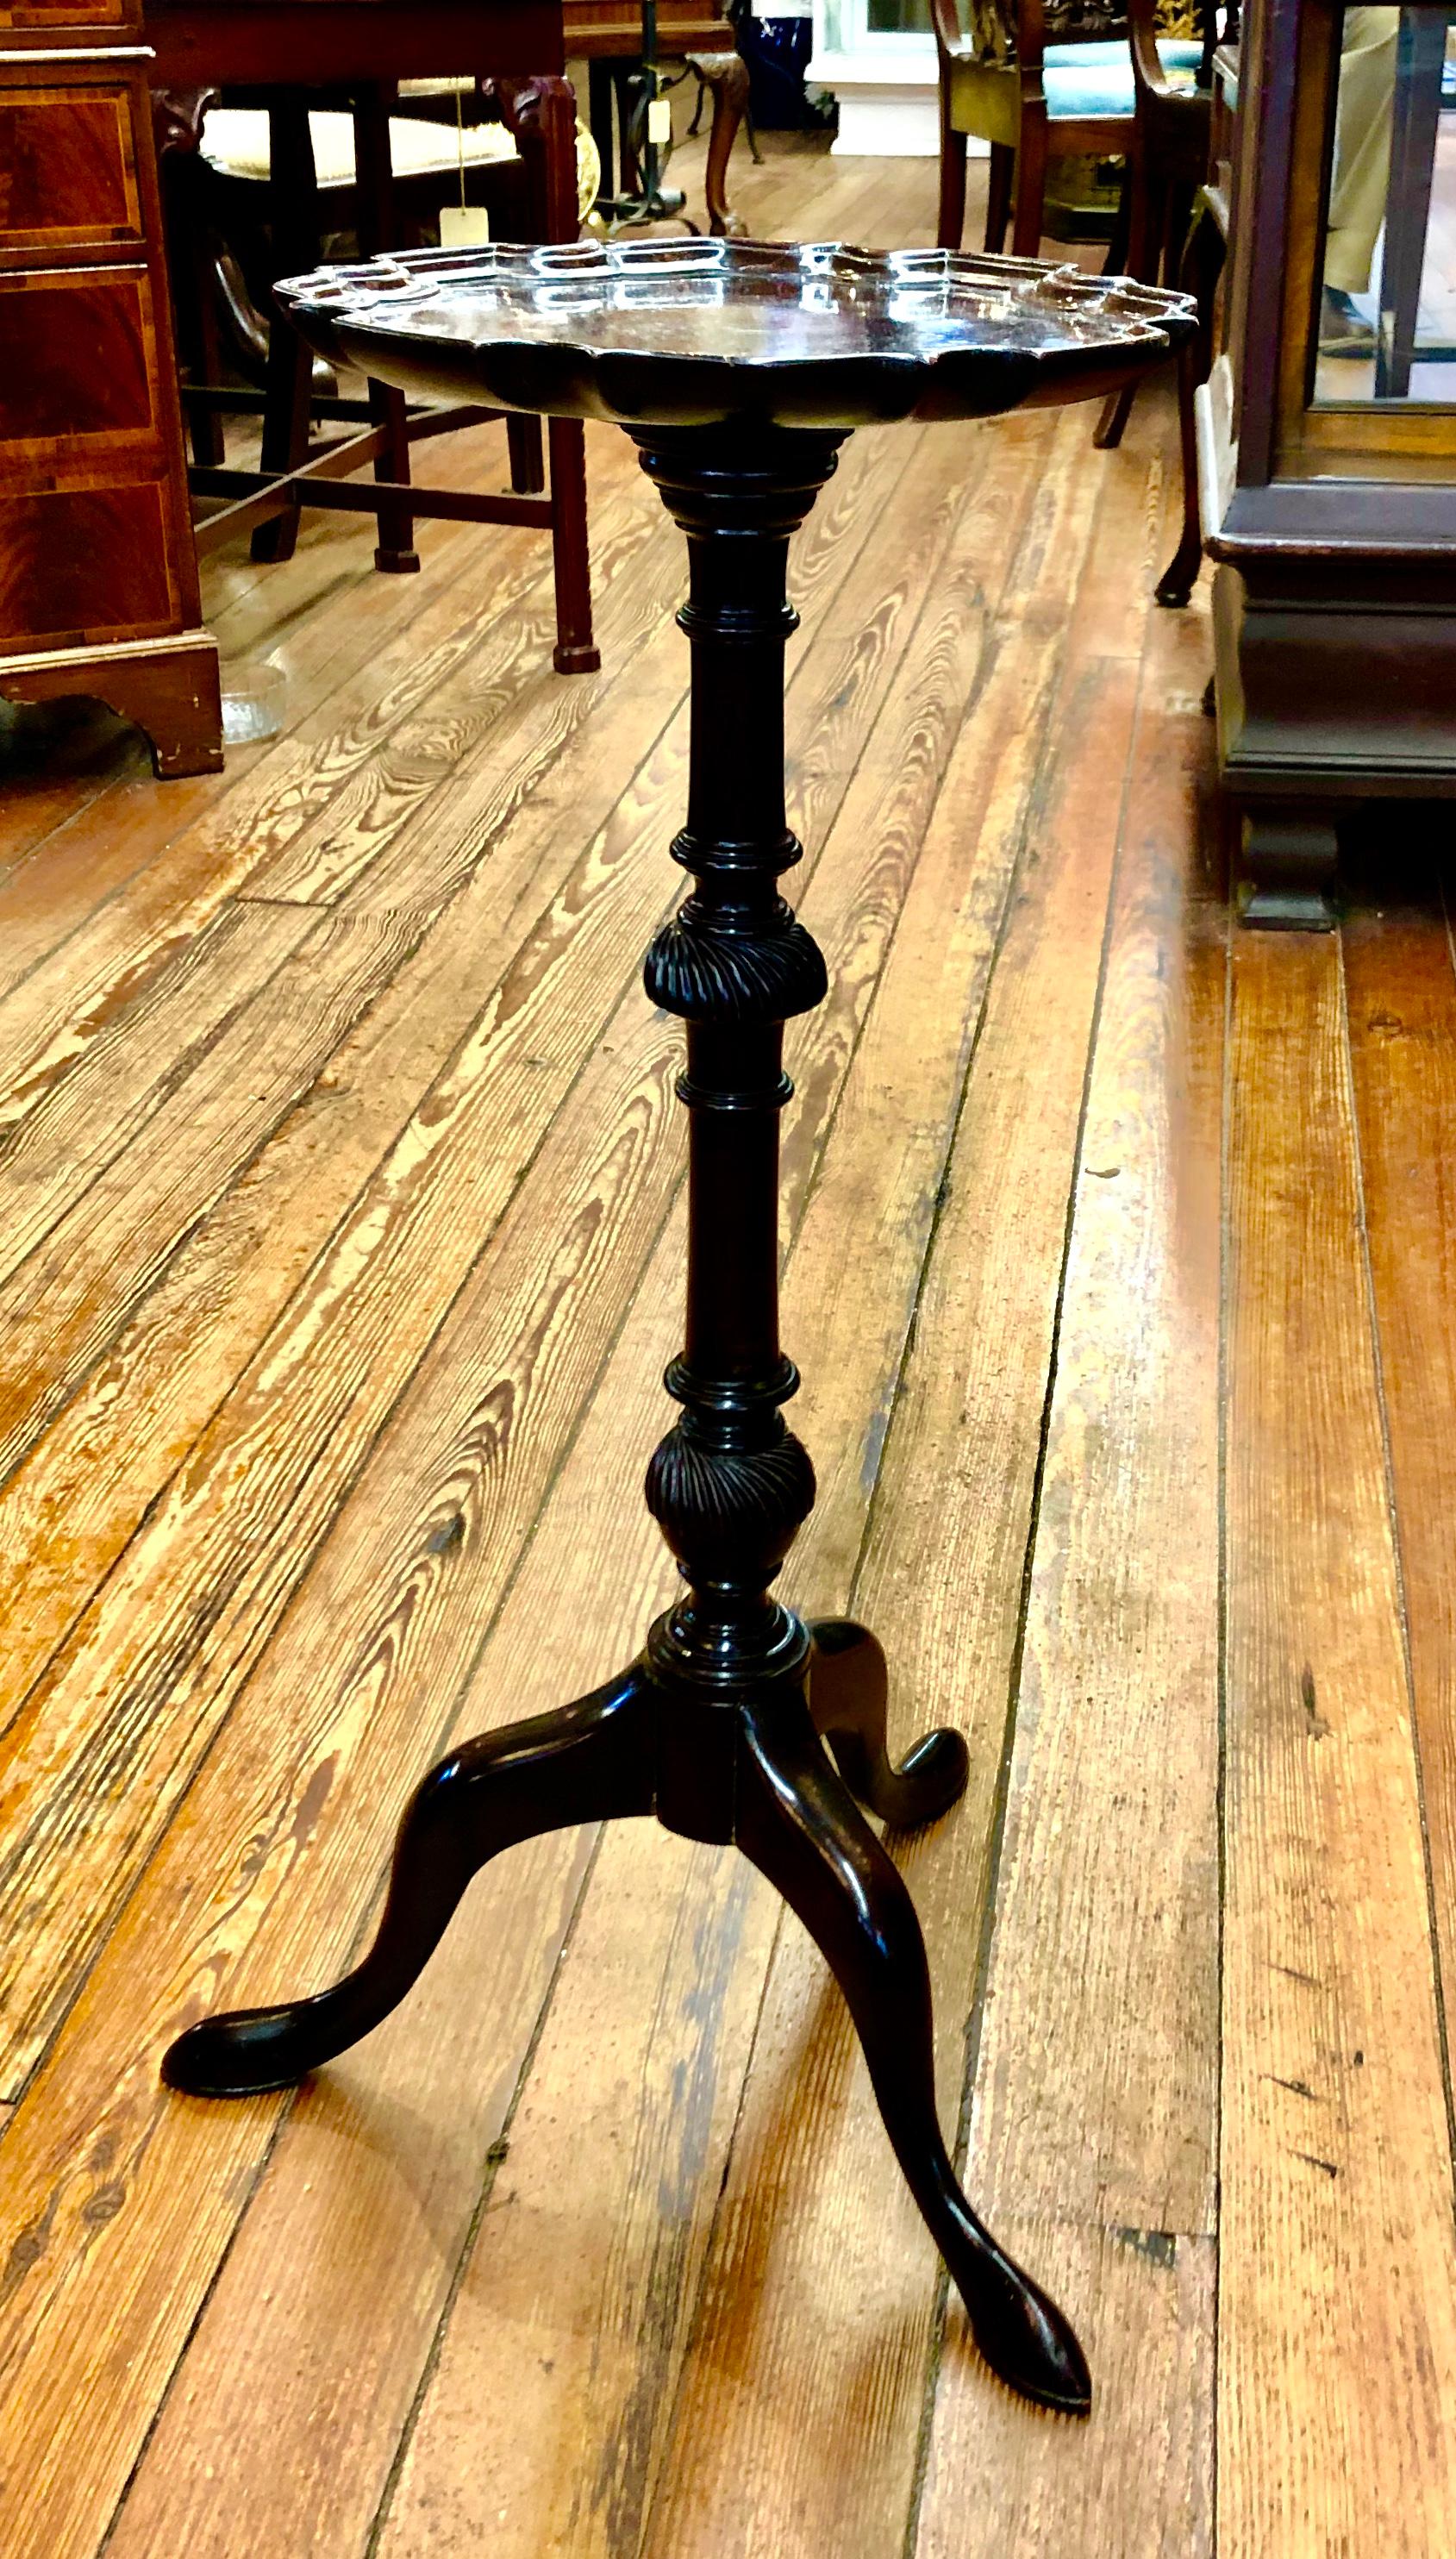 A wonderful late 19th century hand carved solid mahogany Geo. III style kettle stand, candle stand or wine table with superbly carved piecrust edge (not applied - carved out of the solid, one piece top); upon a turned, spiral carved pedestal